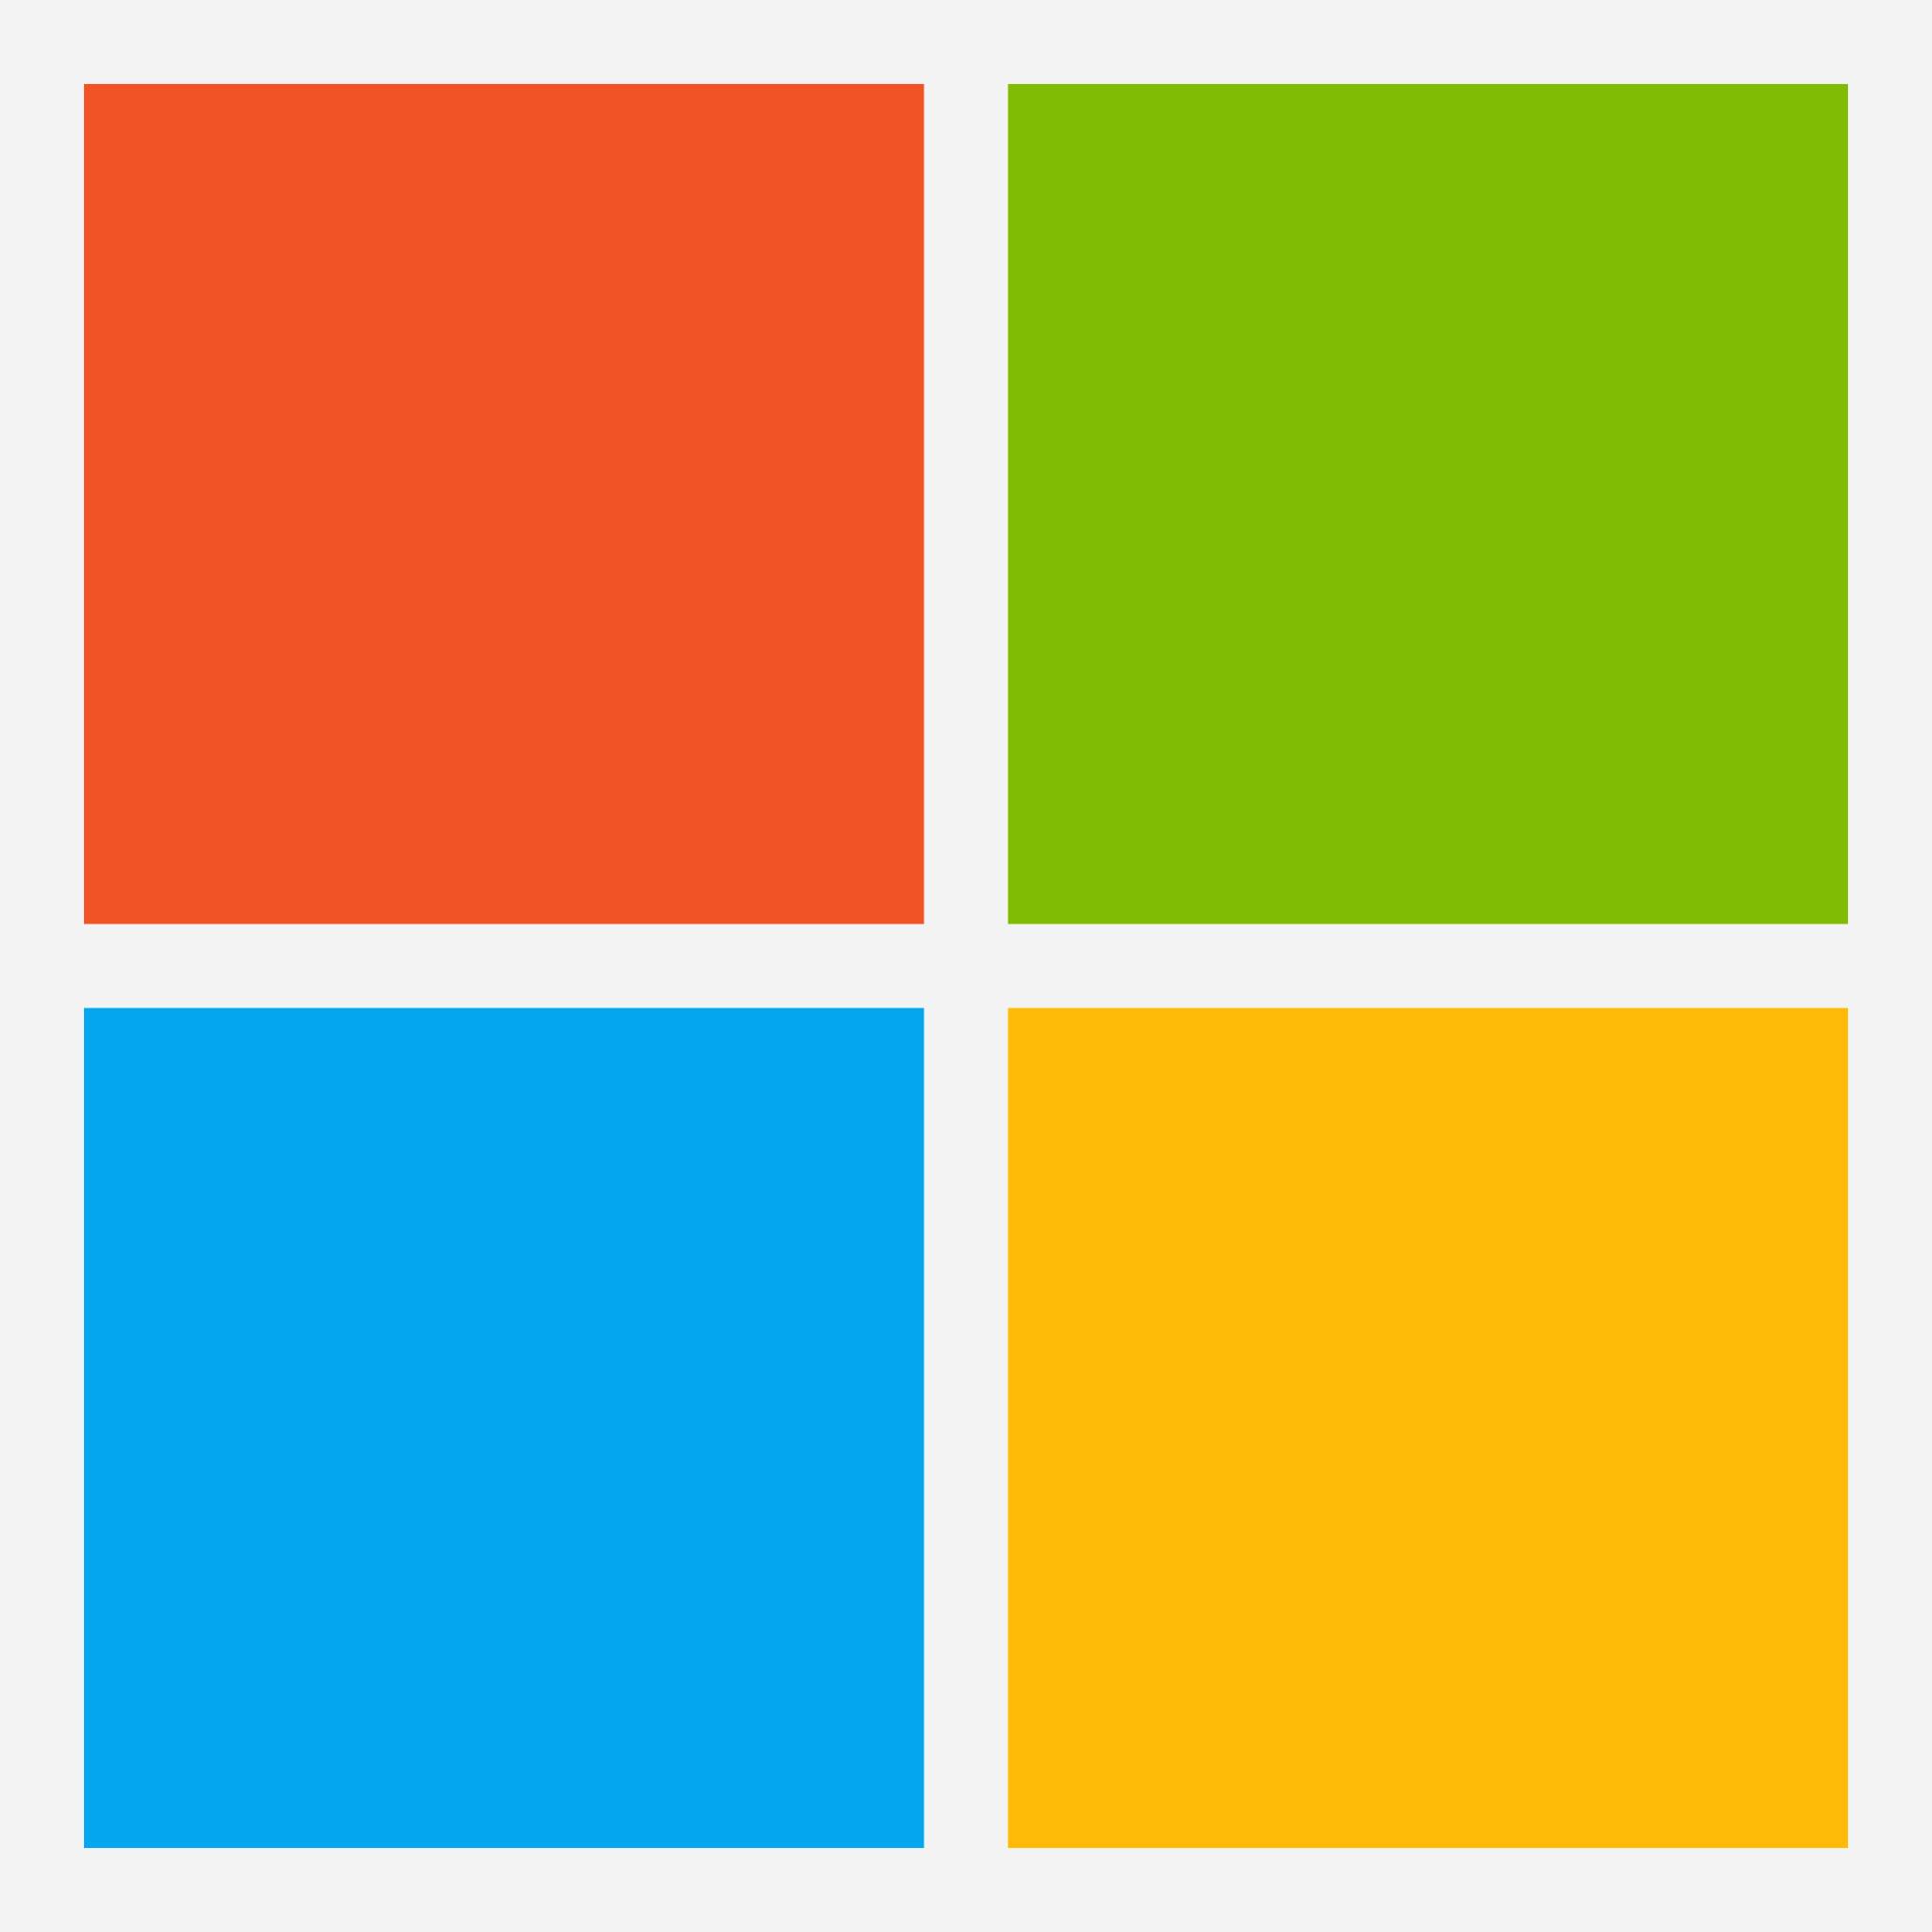 Microsoft India, partners with FiftyTwo.in for Paradigm/Shift